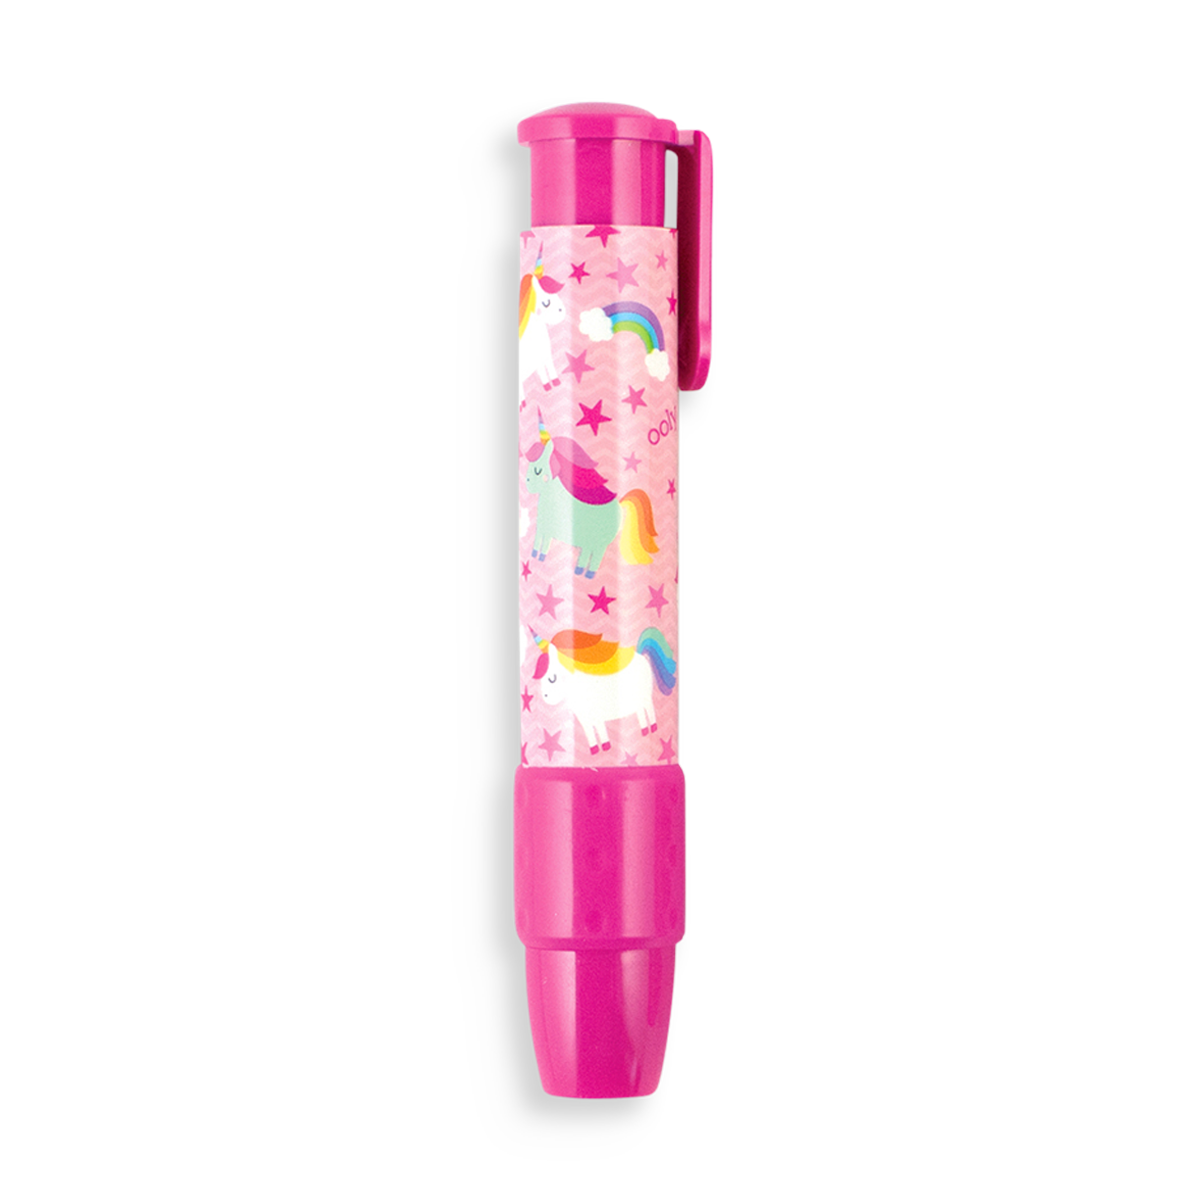 Hot Pink Clickit Eraser with Unicorn Designs